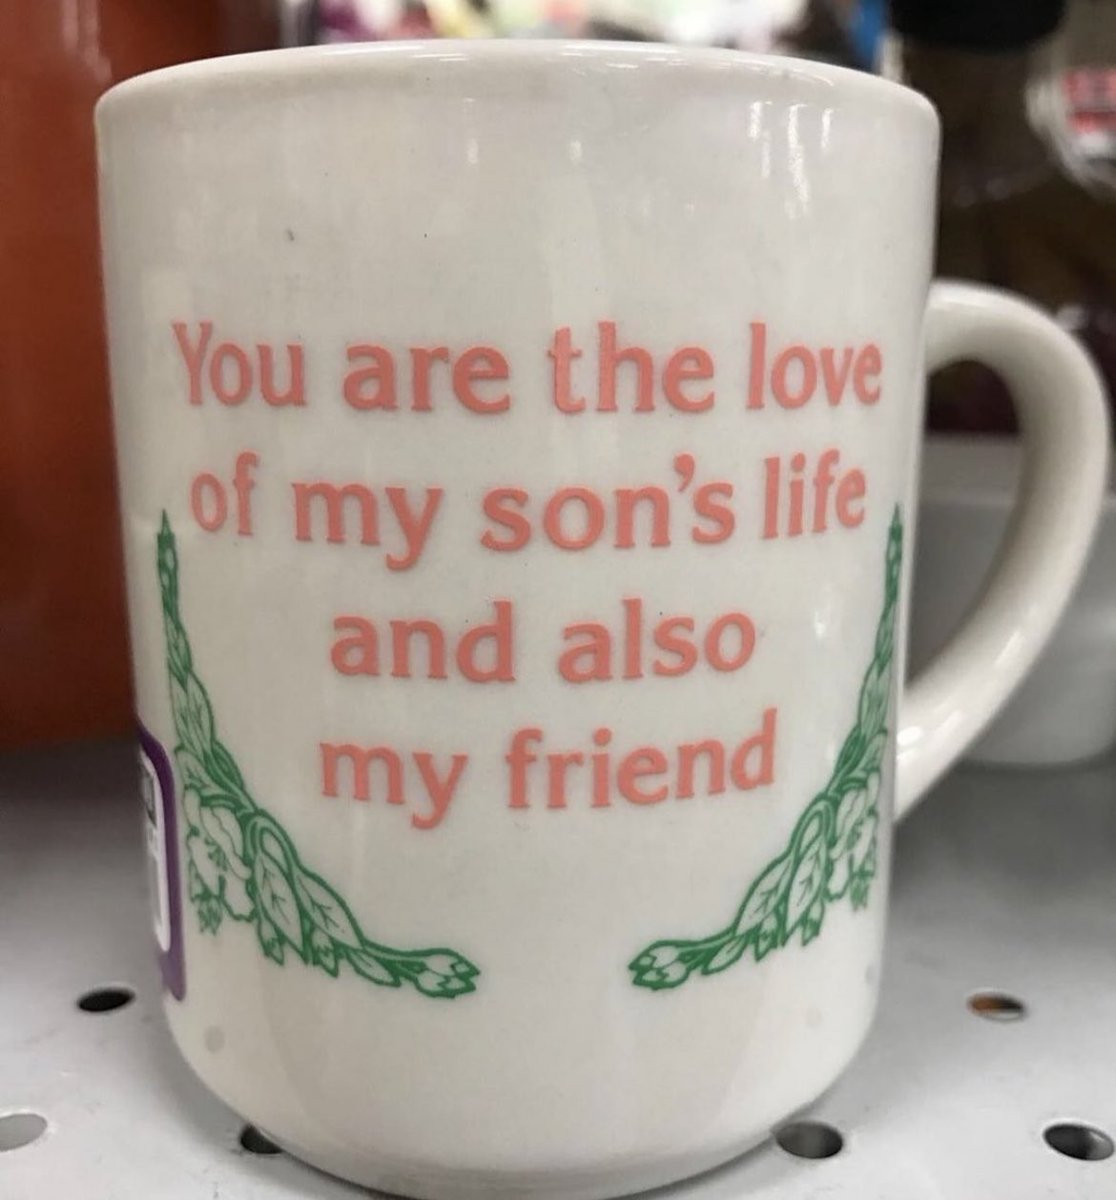 I can’t stop thinking about this mug